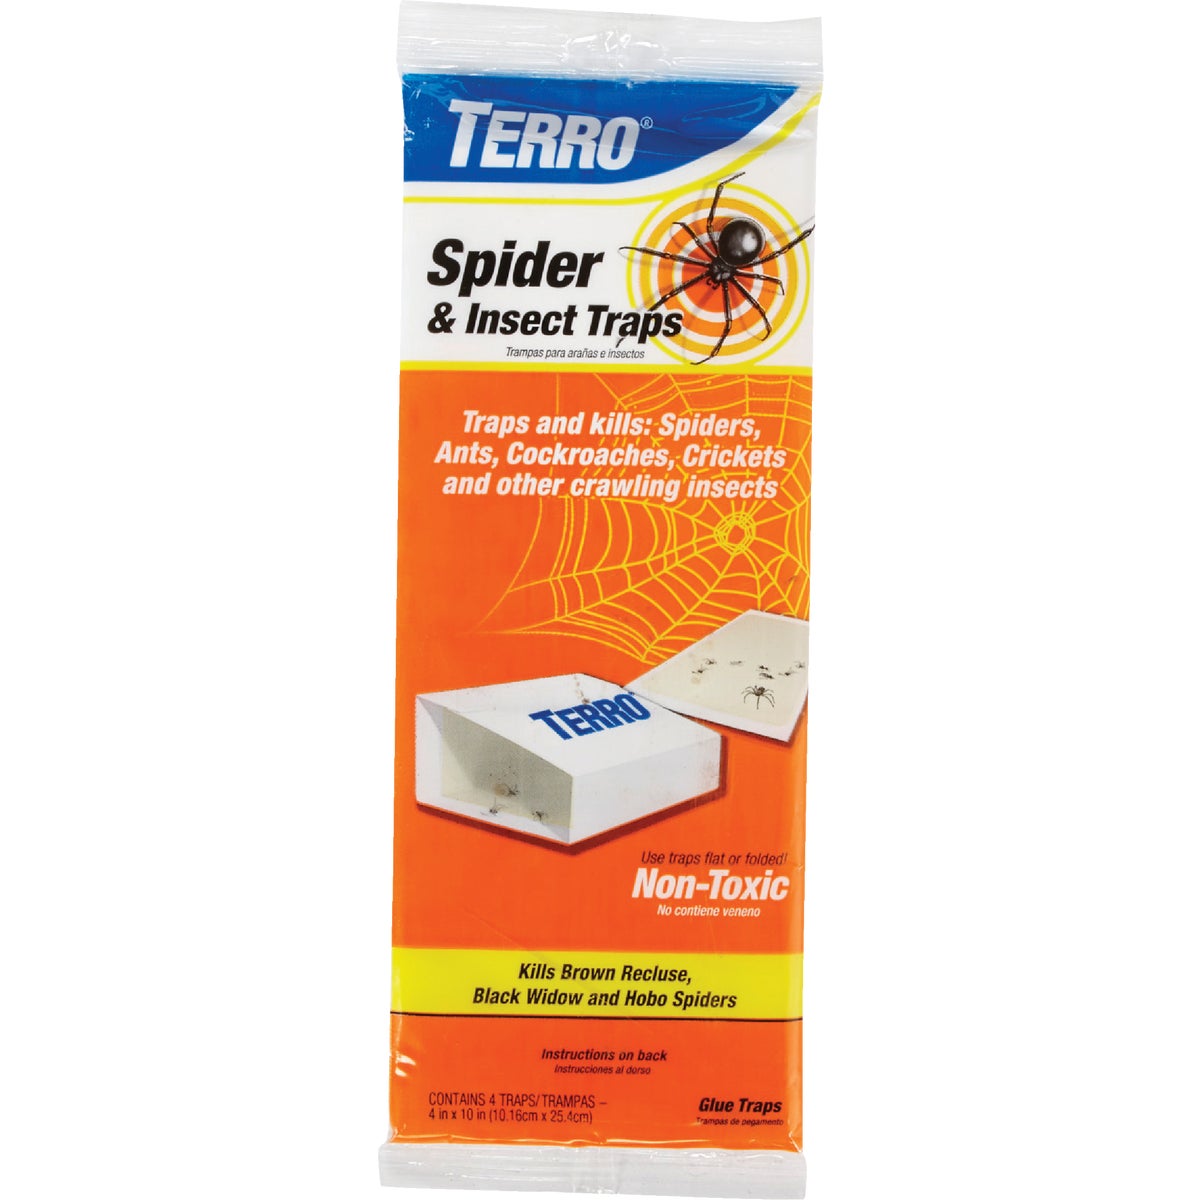 Item 700279, Non-toxic, pesticide-free, easy to use trap.